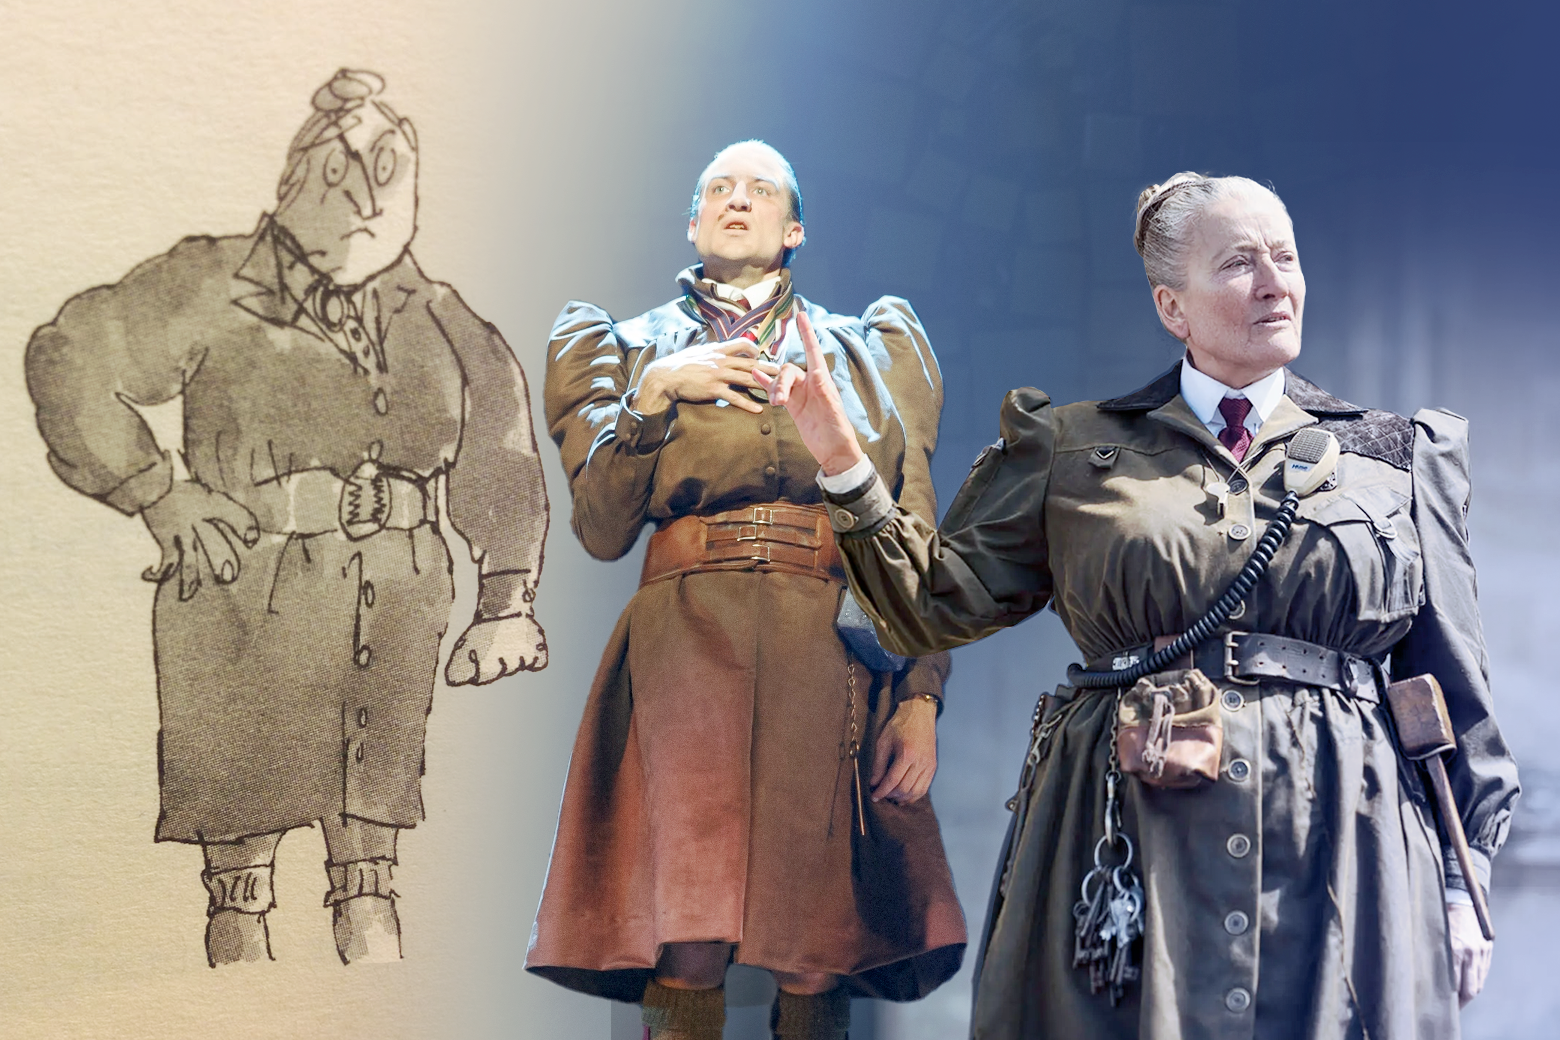 The book illustration, the musical version, and the most recent movie version of images of the Trunchbull are contrasted.